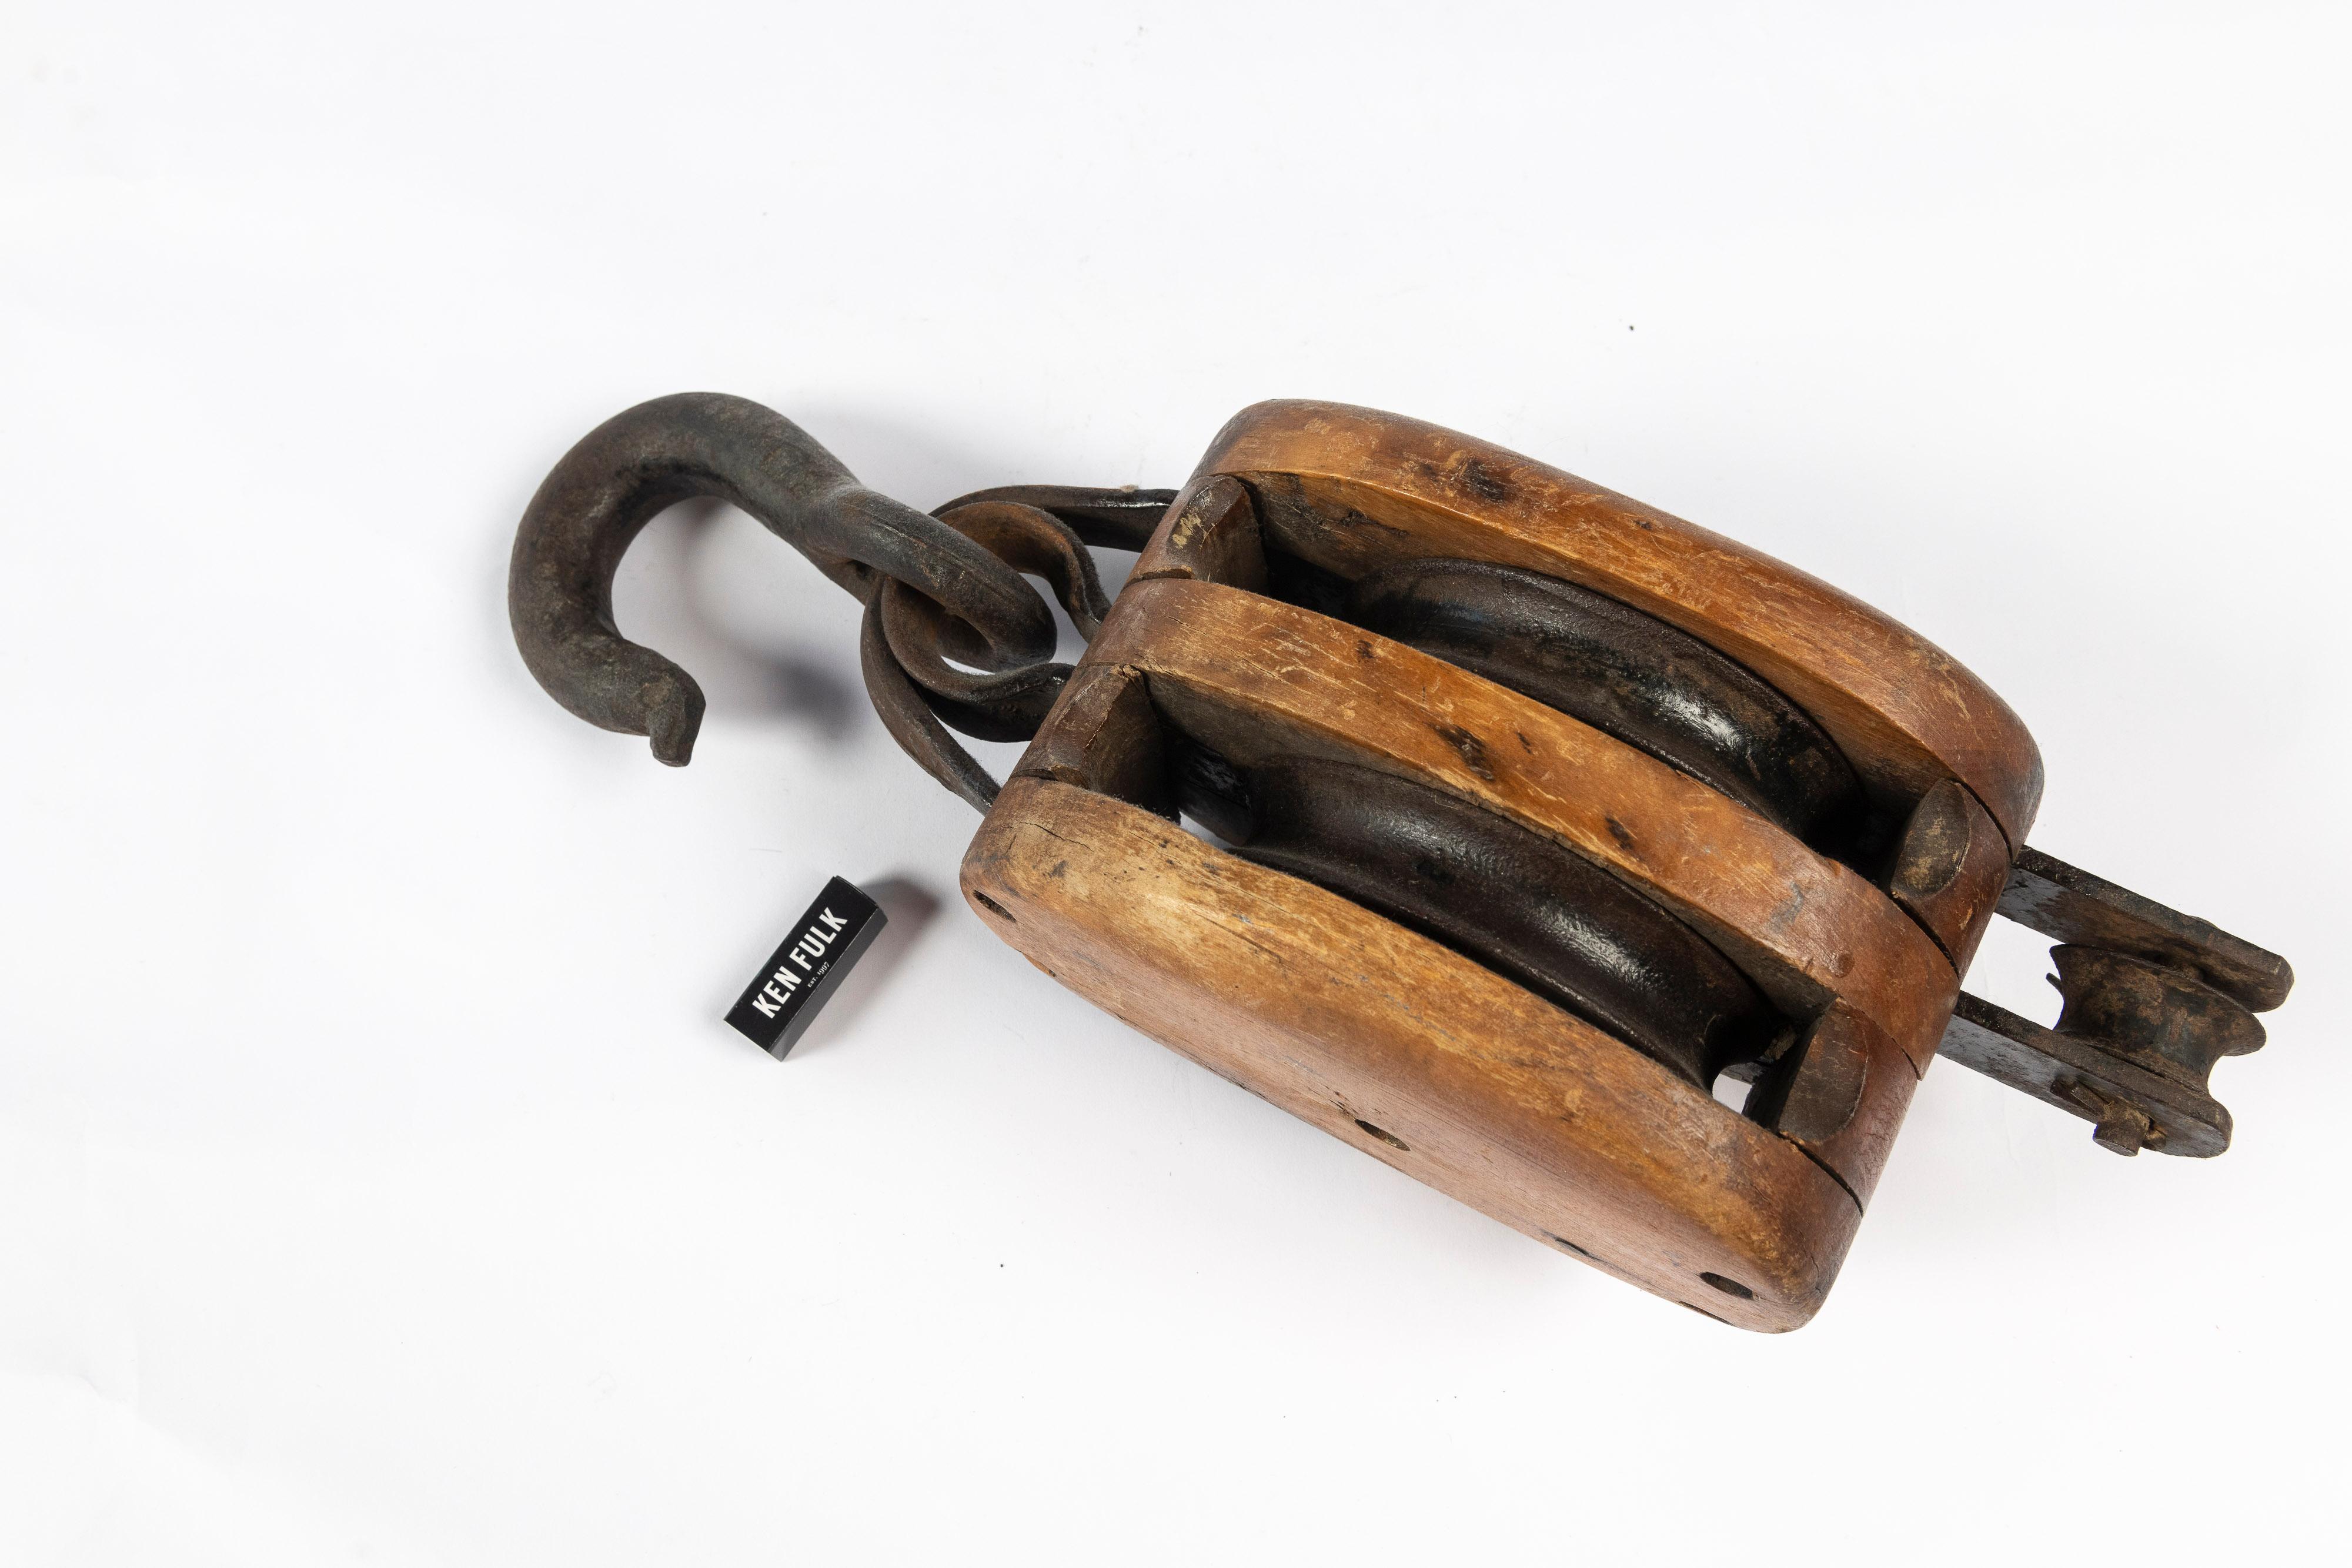 Beautiful vintage wood and iron pulley in excellent working condition. May have been used to hoist the sails of a ship or to lift bales of hay in an antique barn. Today, this functional pulley, with its aged patina, is perfect for industrial, farm